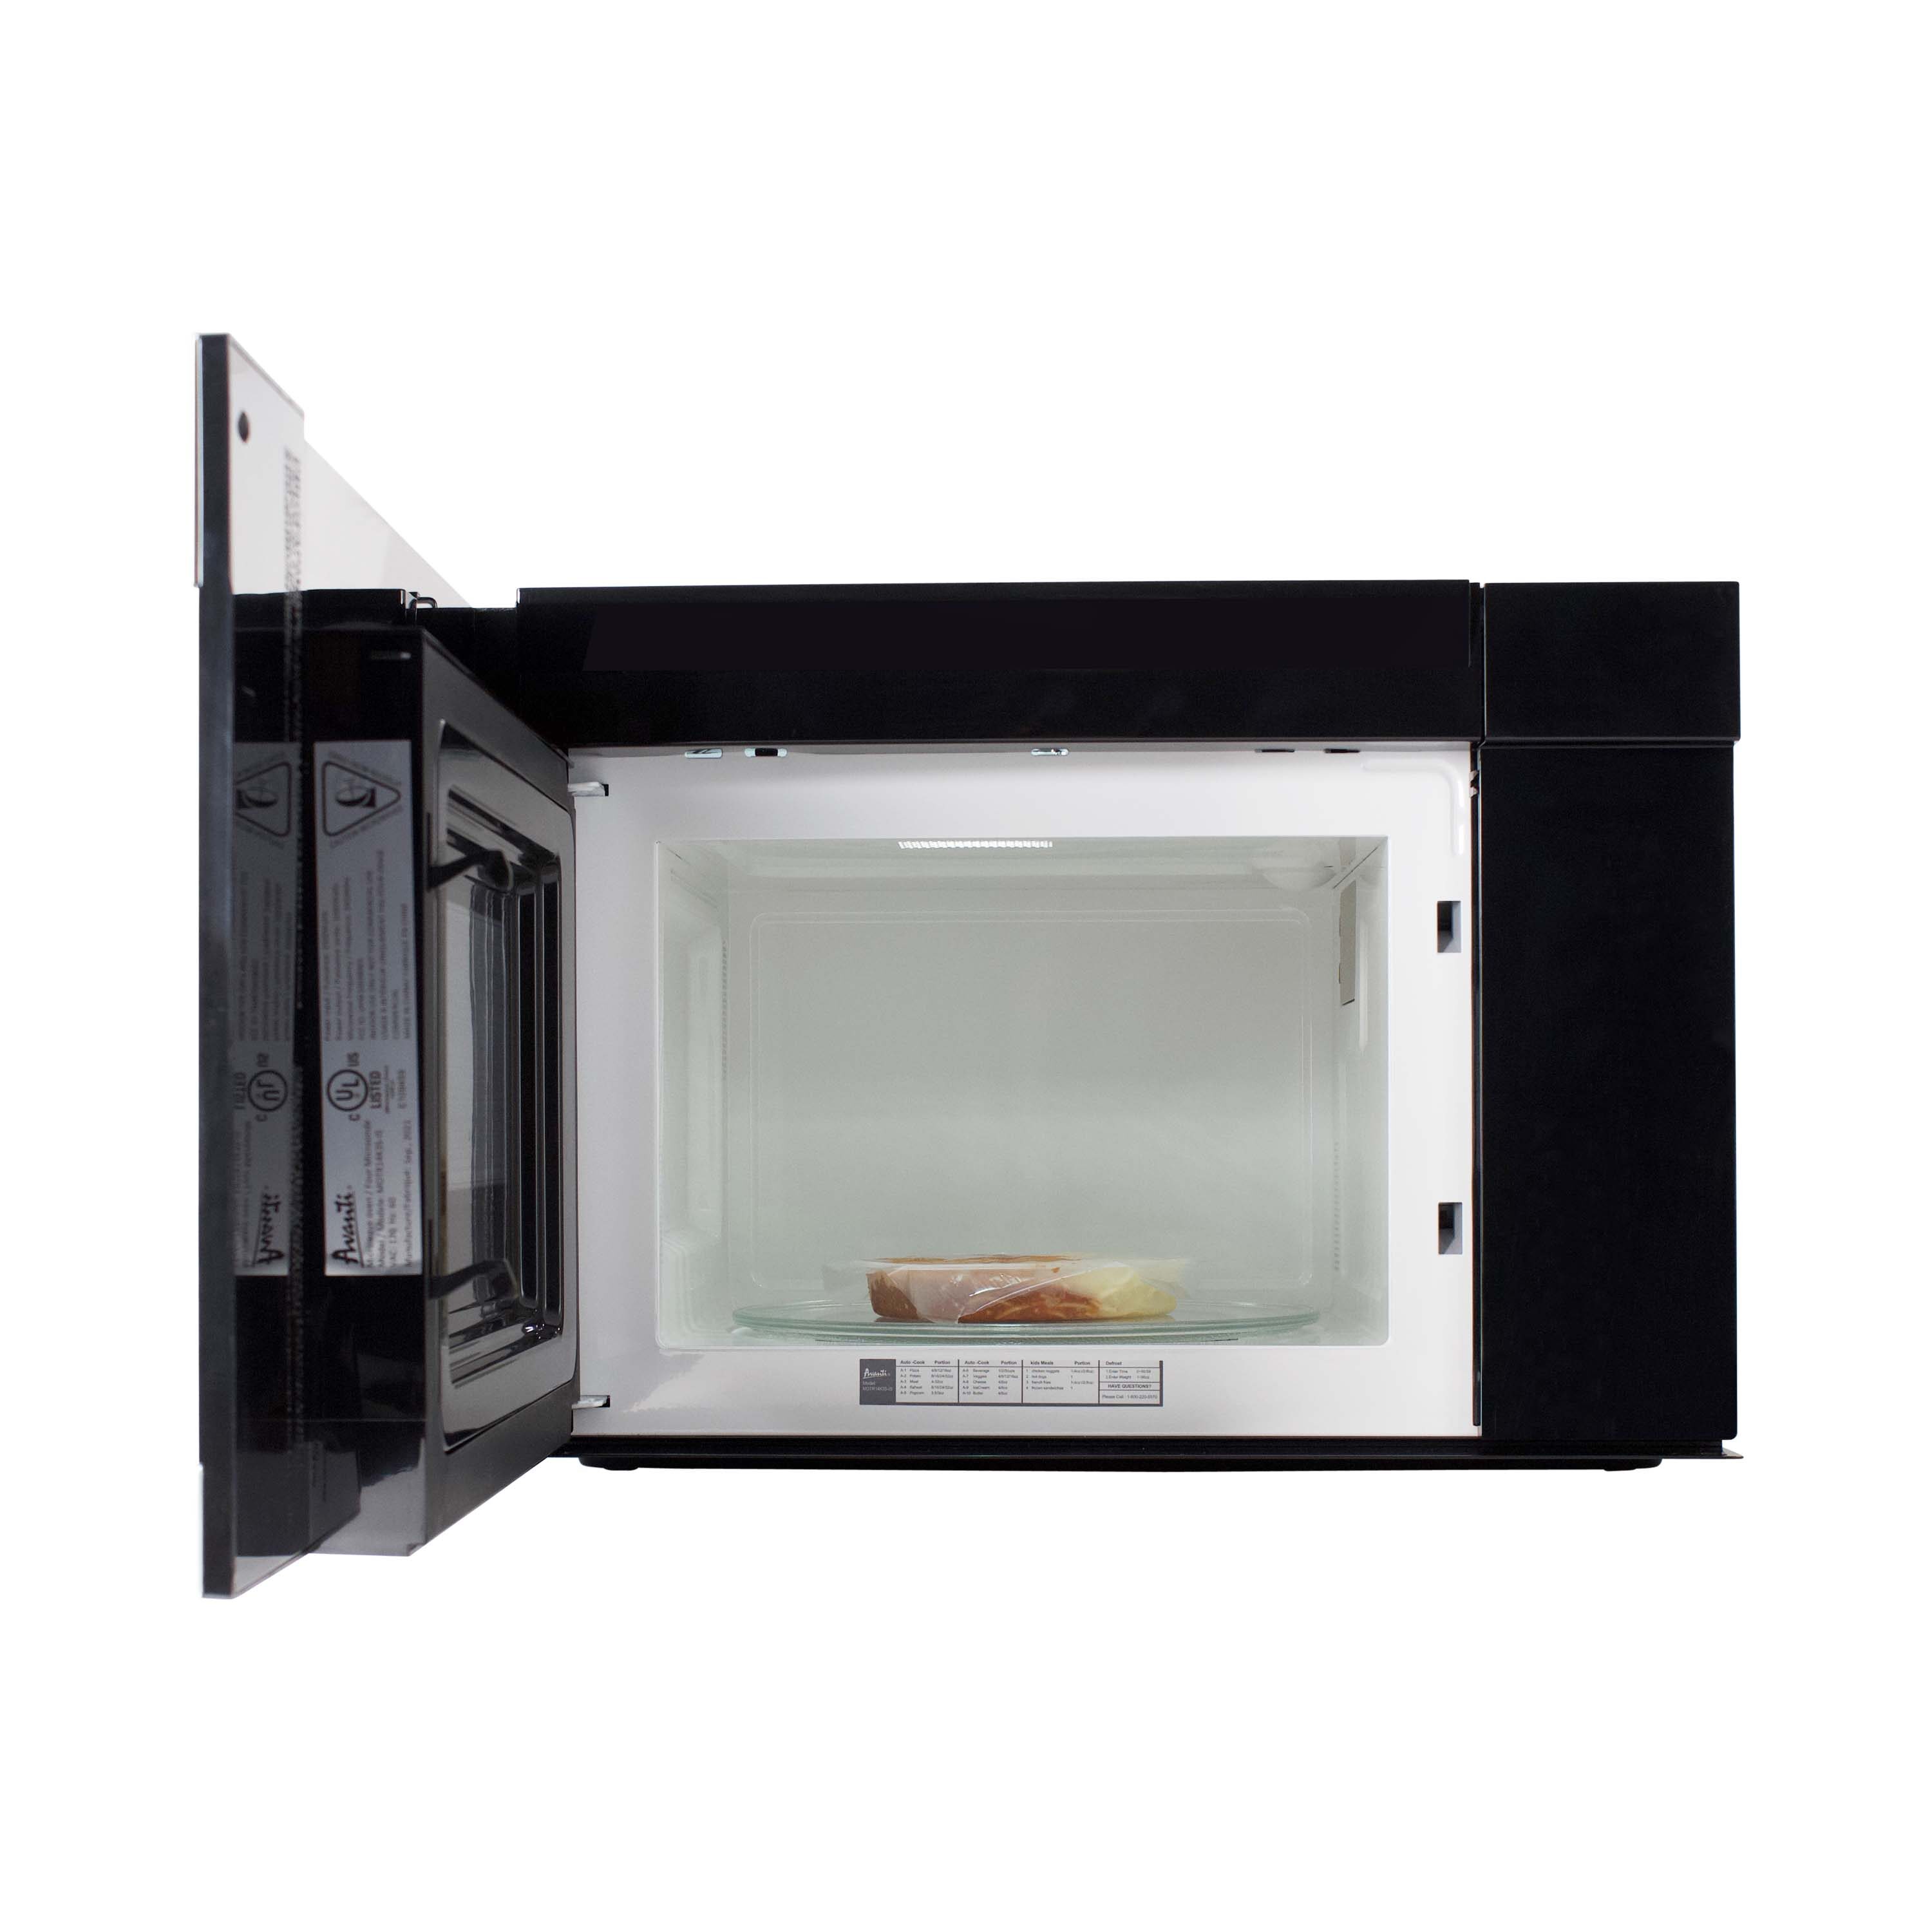 MT7V1B by Avanti - 0.7 cu. ft. Microwave Oven